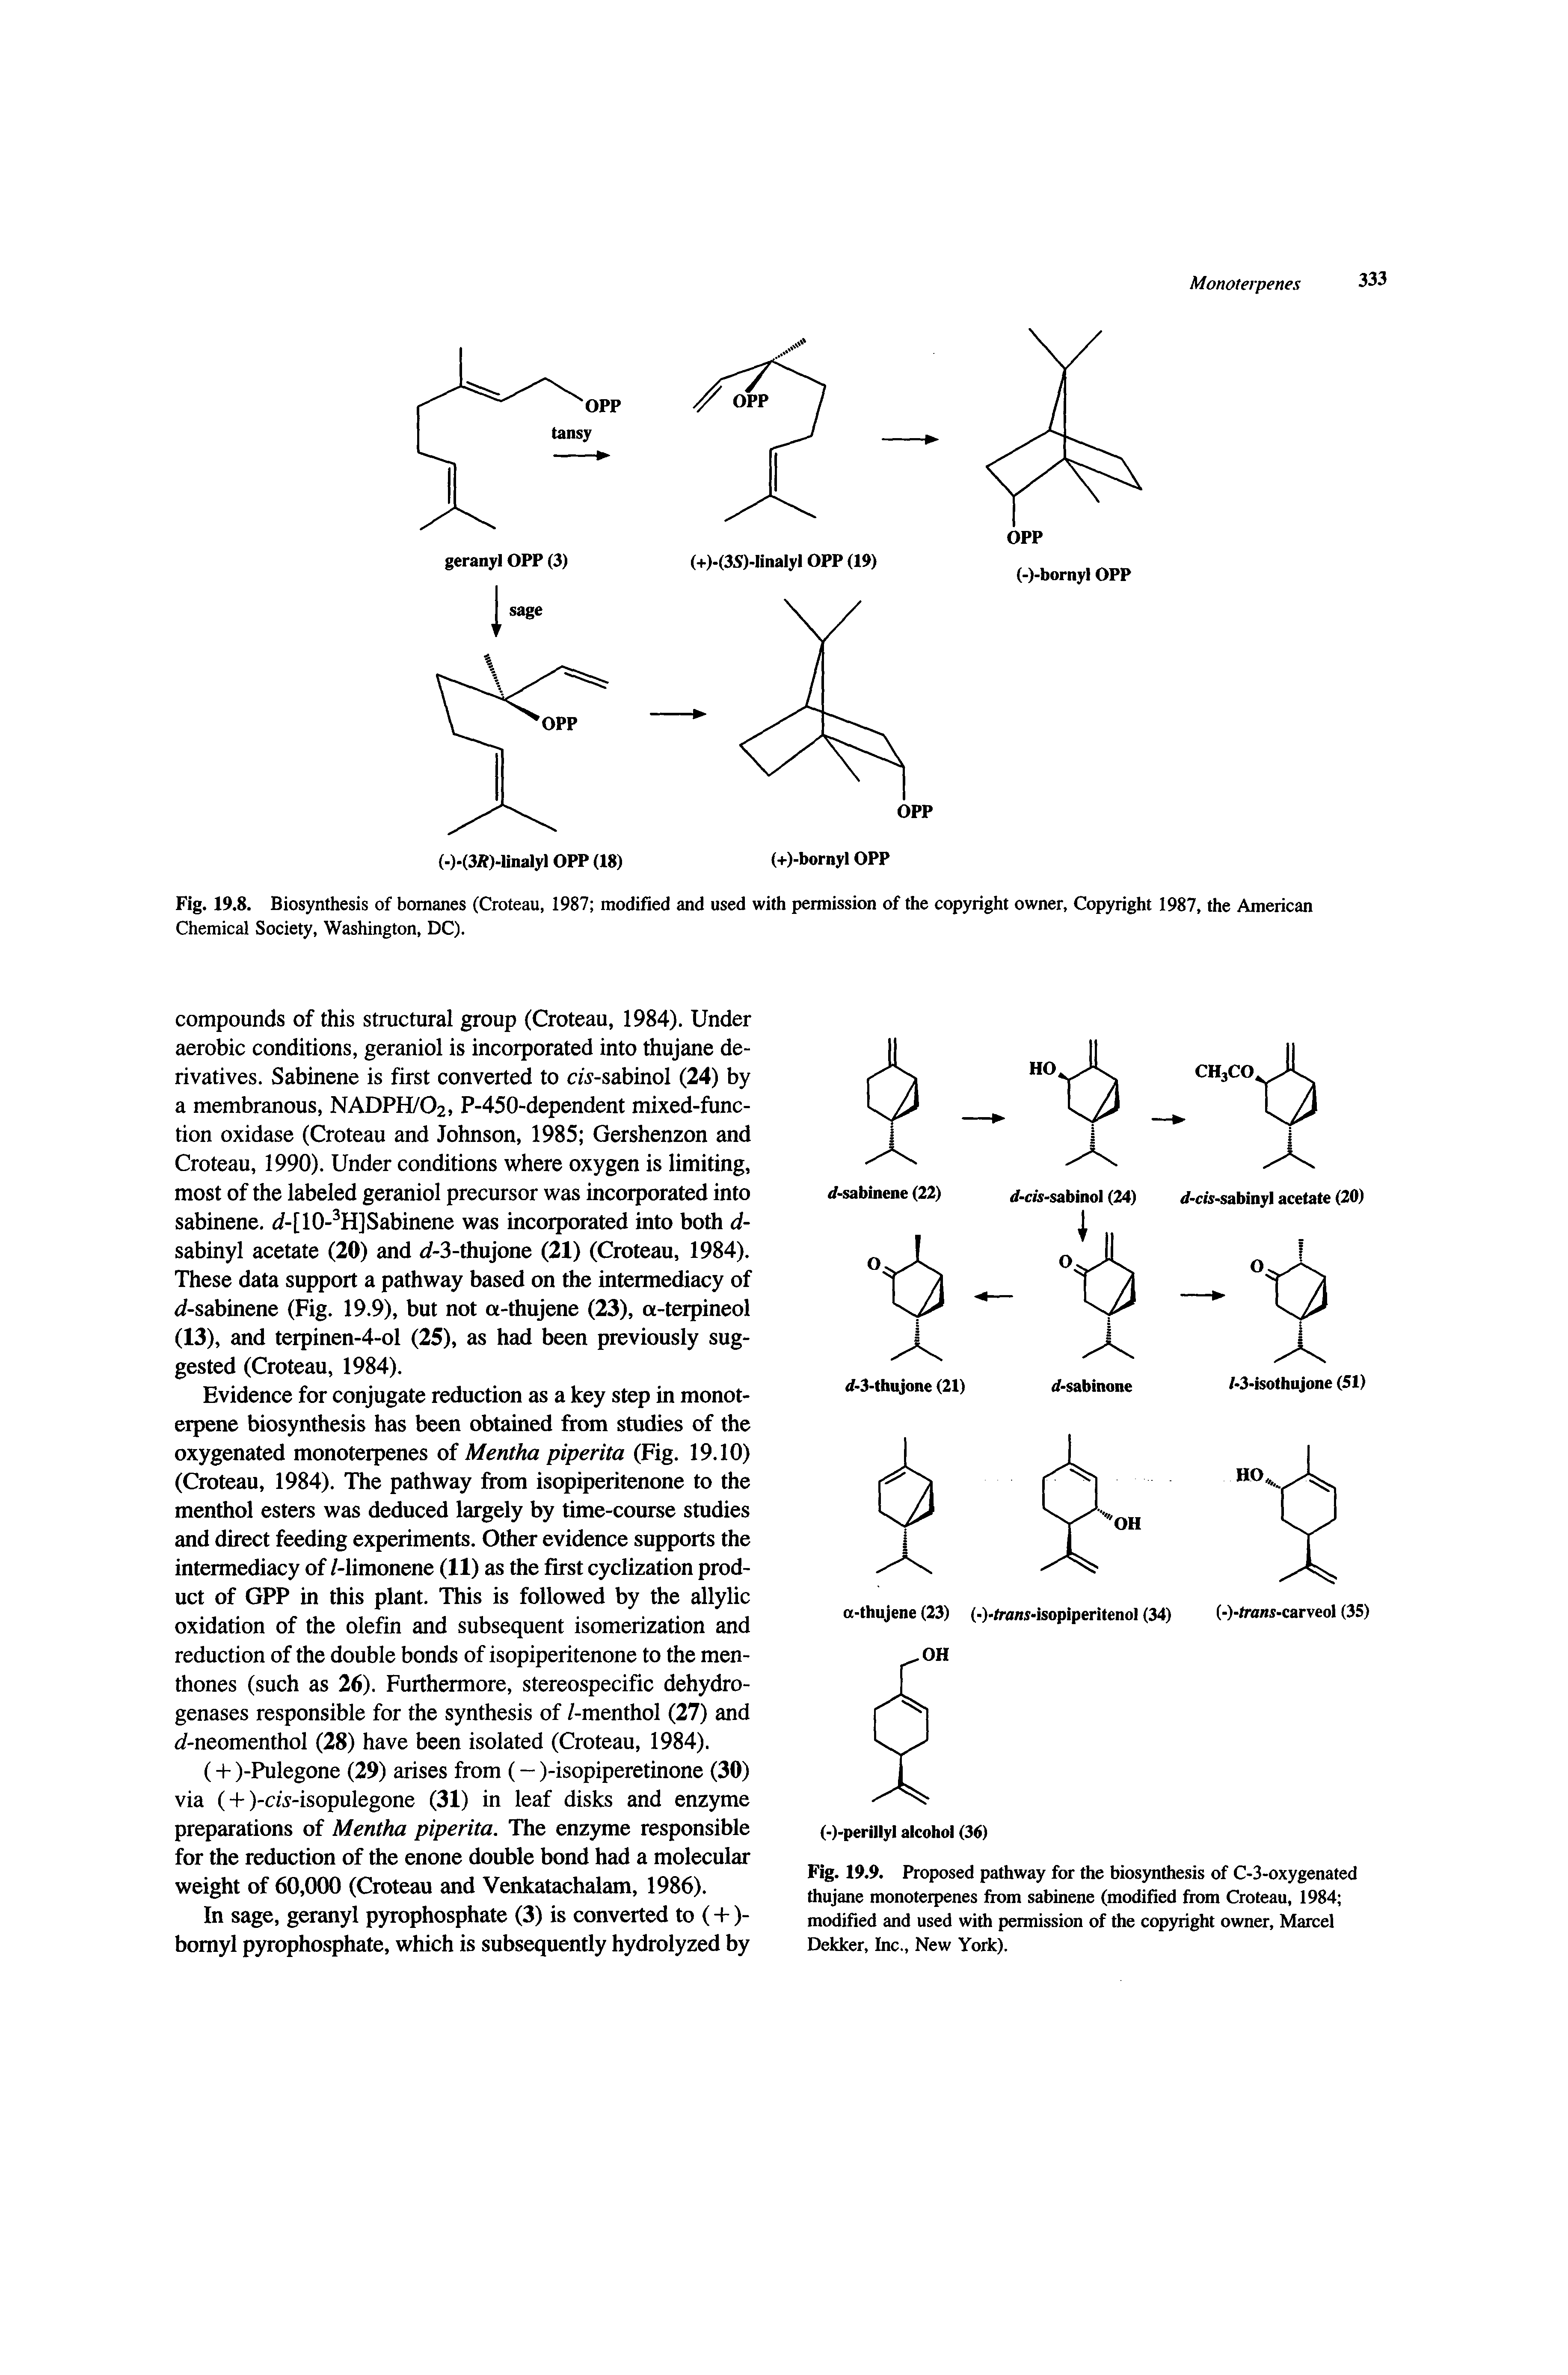 Fig. 19.9. R-oposed pathway for the biosynthesis of C-3-oxygenated thujane monoterpenes from sabinene (modified from Croteau, 1984 modified and used with permission of the copyright owner, Marcel Dekker, Inc., New York).